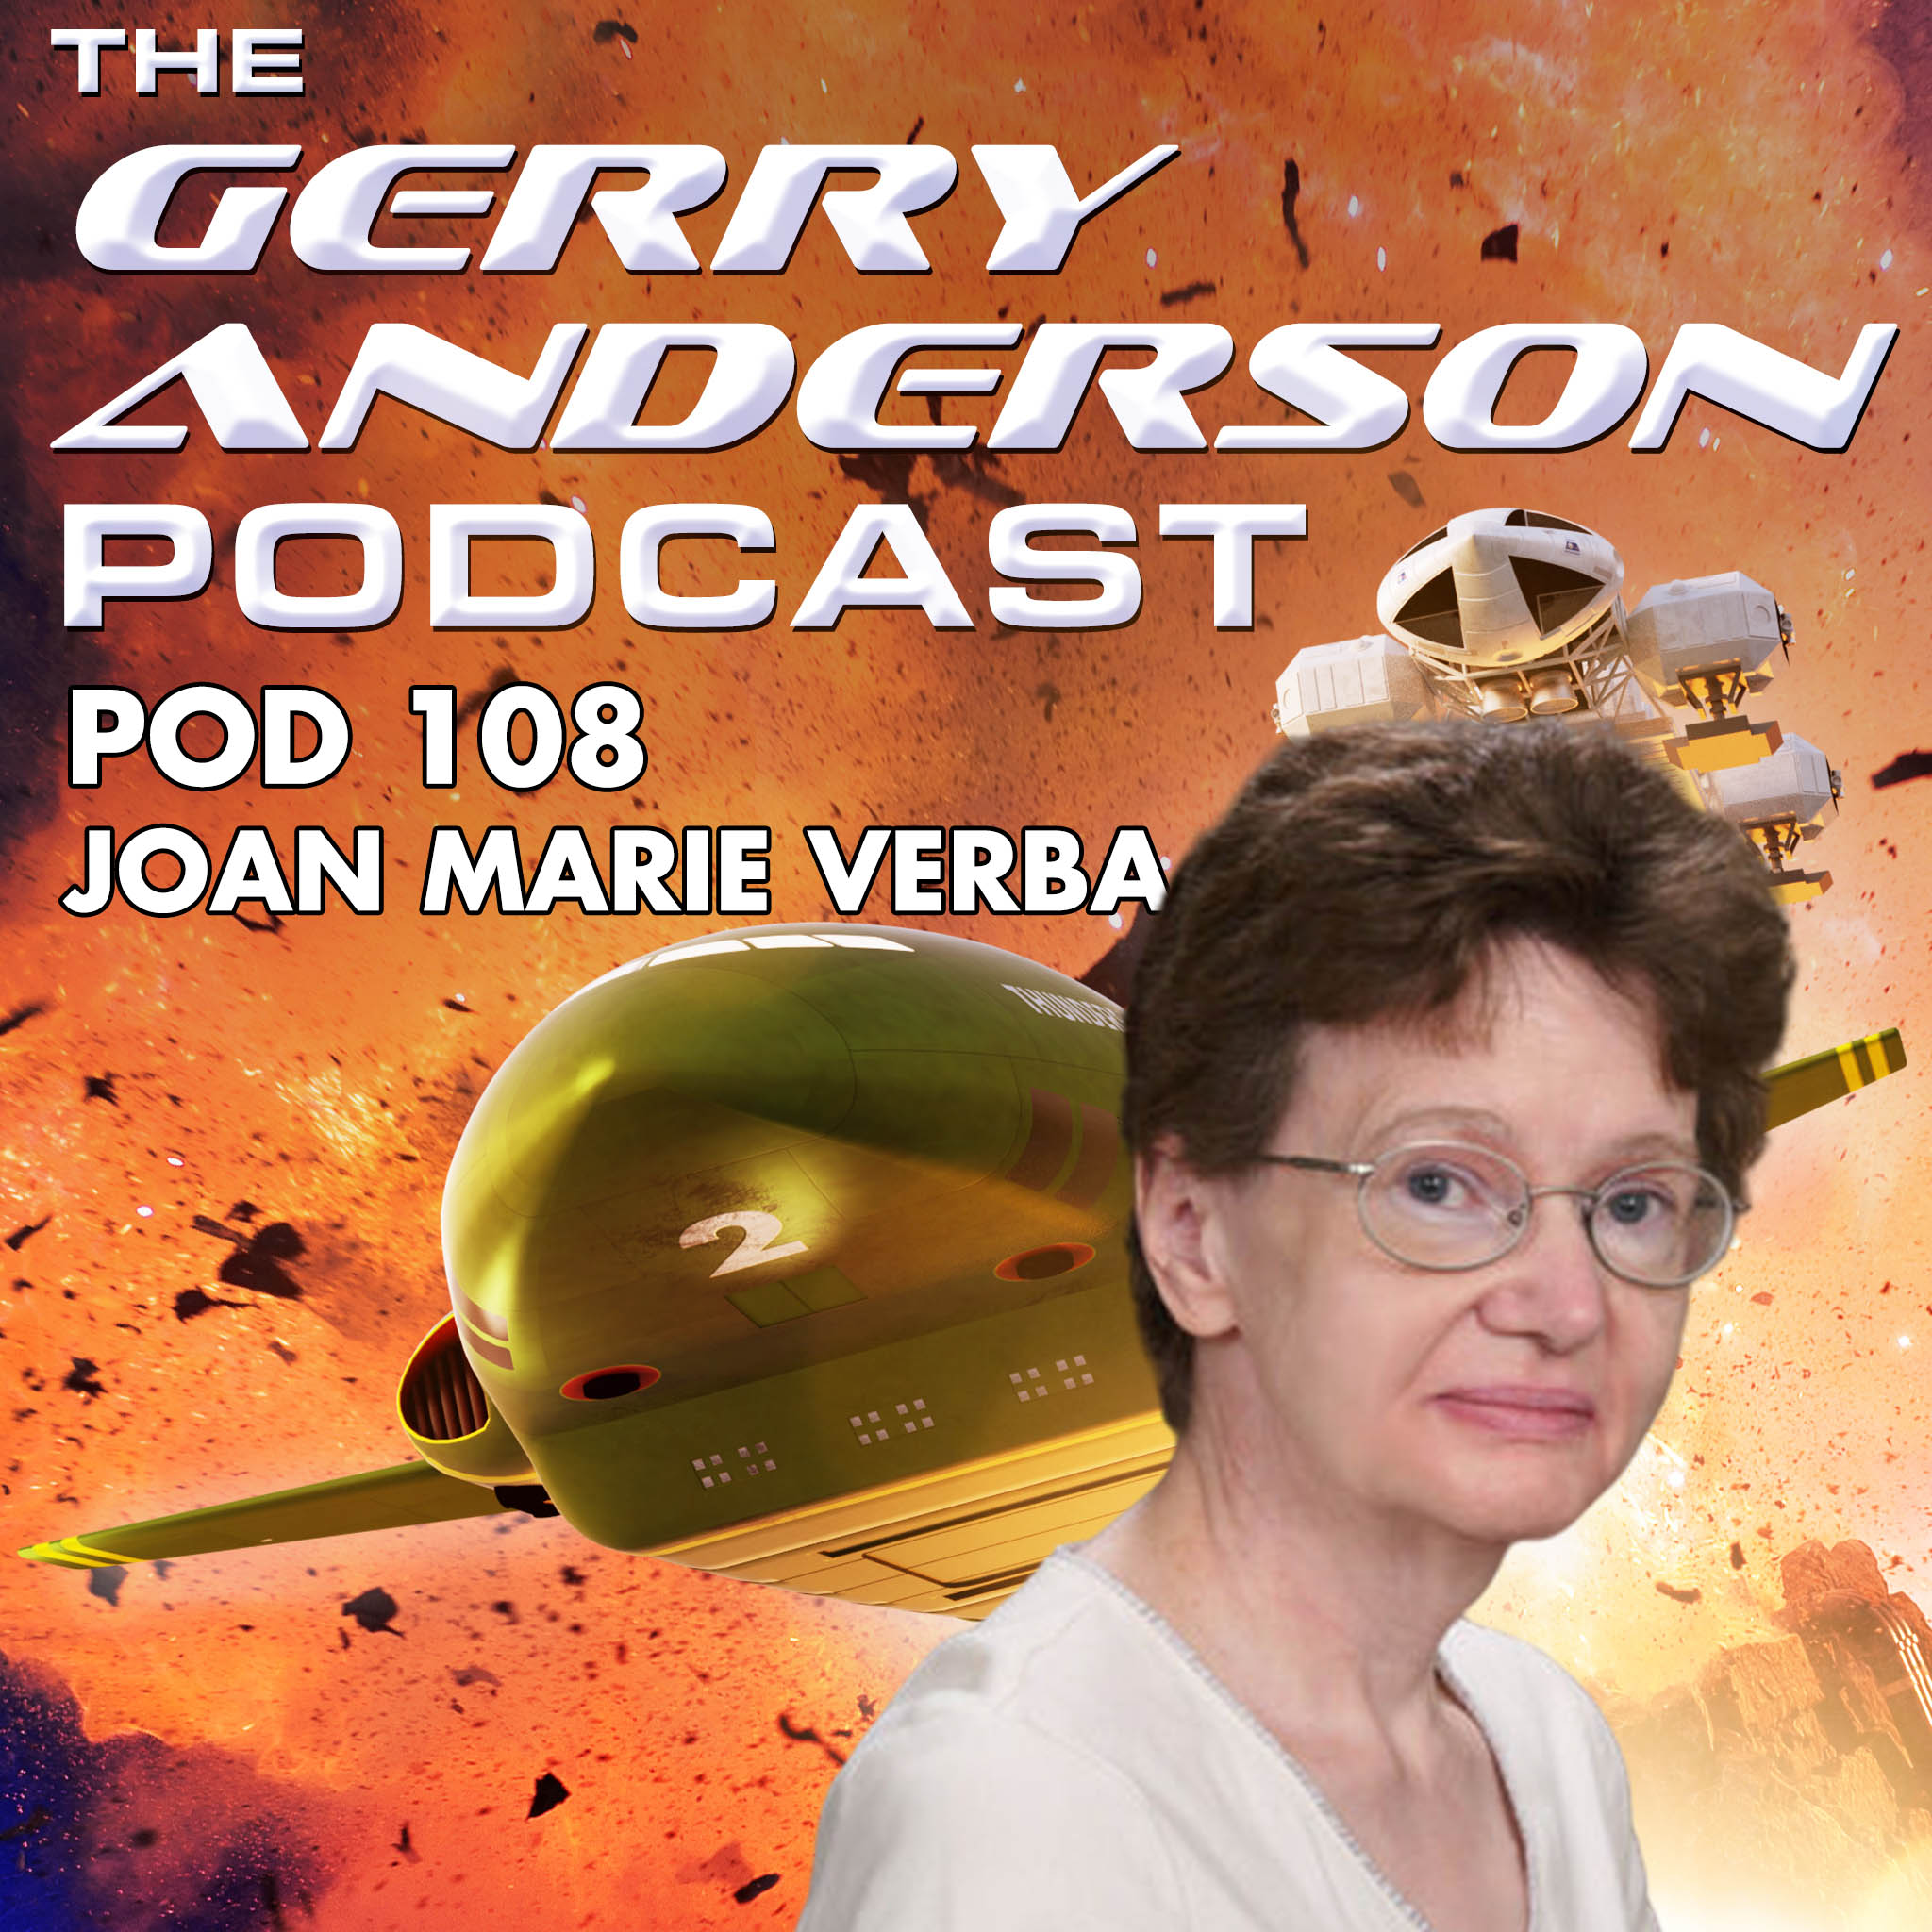 Artwork for podcast The Gerry Anderson Podcast